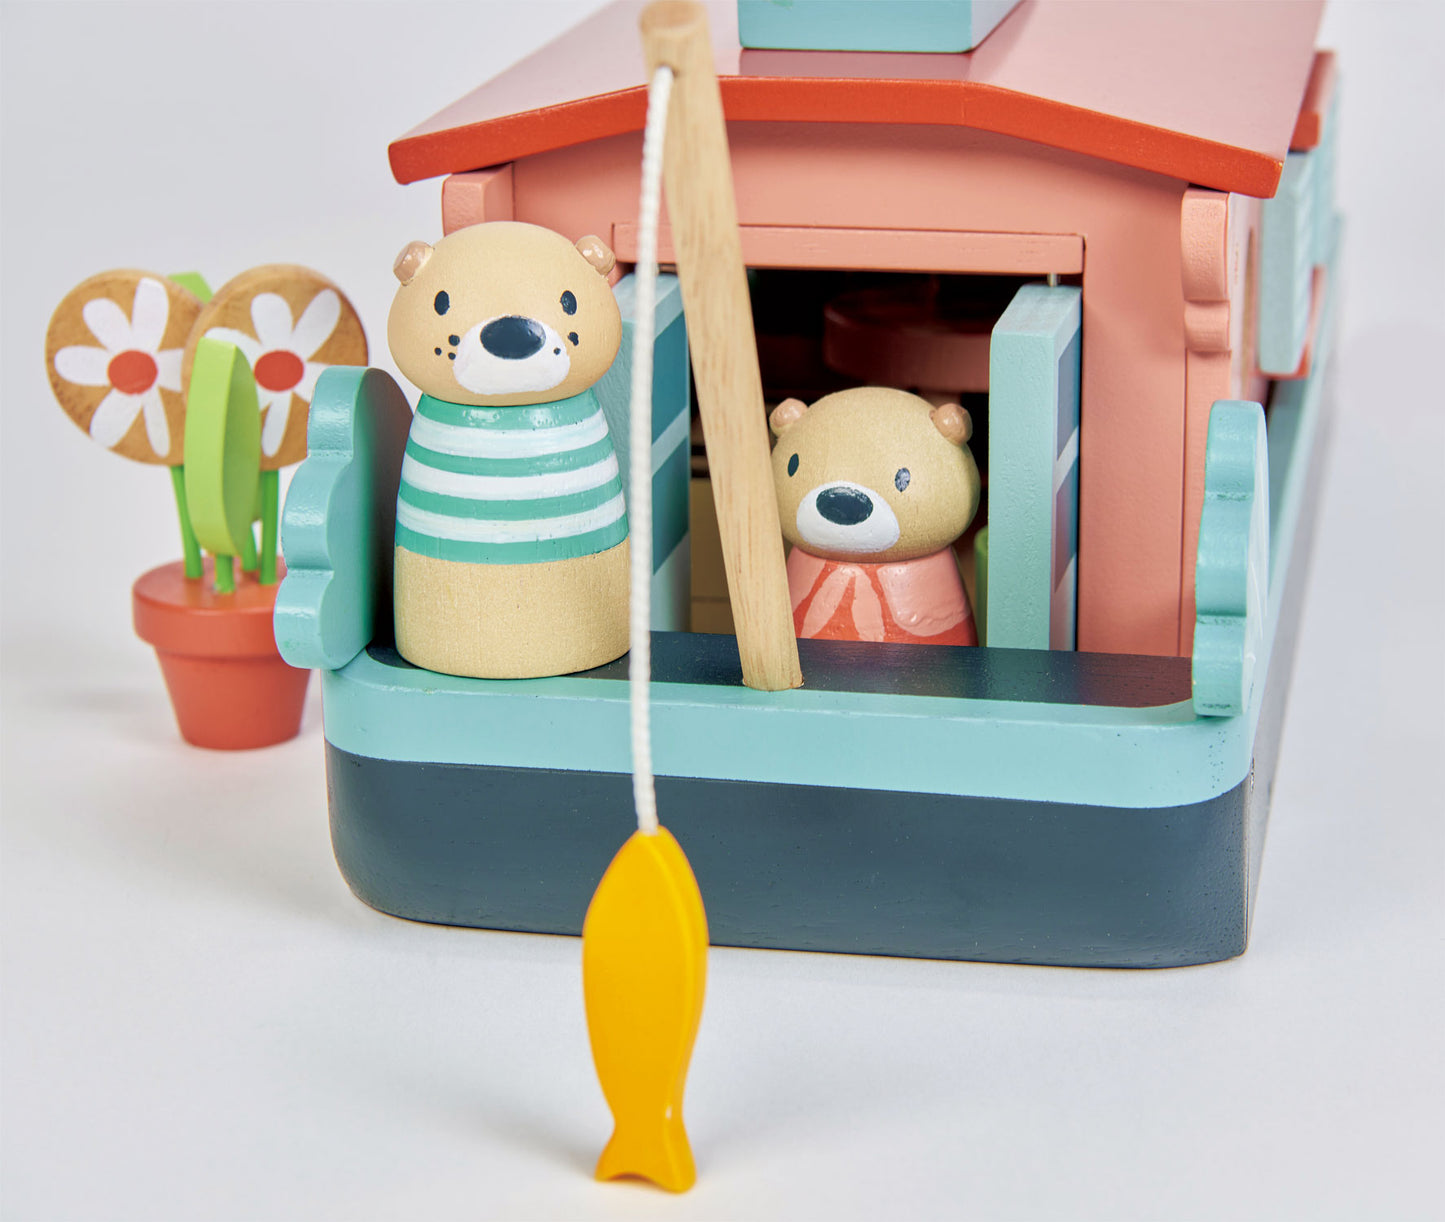 Little Otter Canal Boat | Wooden Toy Play Set For Kids